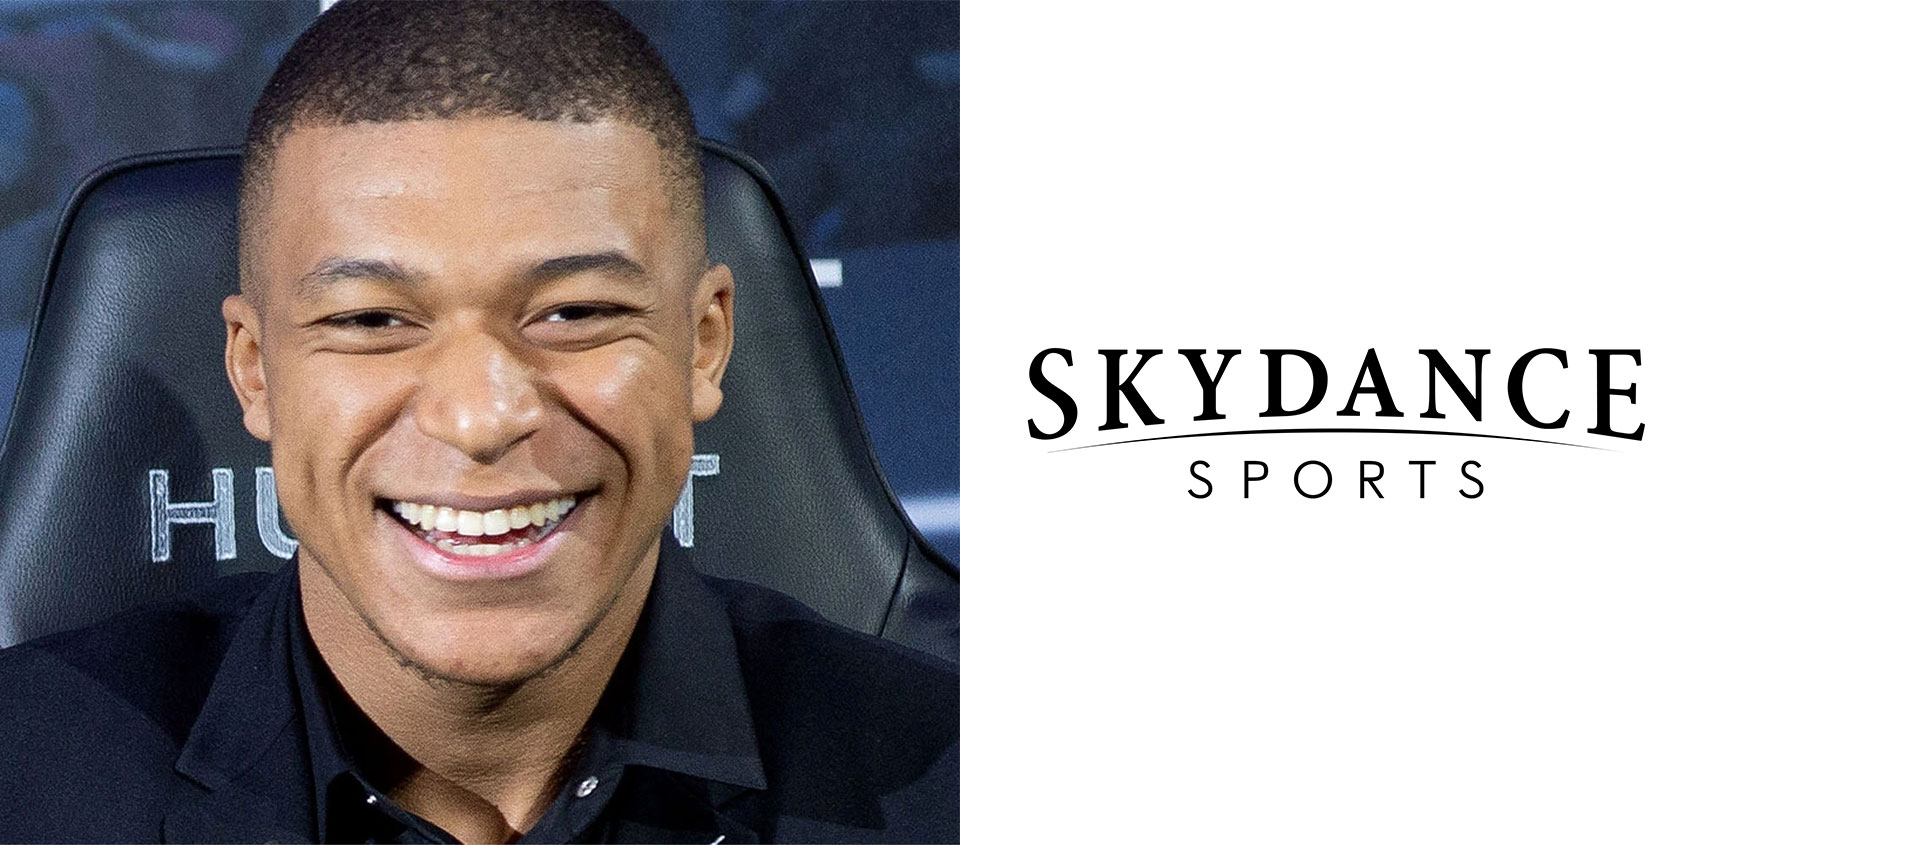 Kylian Mbappé Inks First Look Deal With Skydance Sports (Exclusive